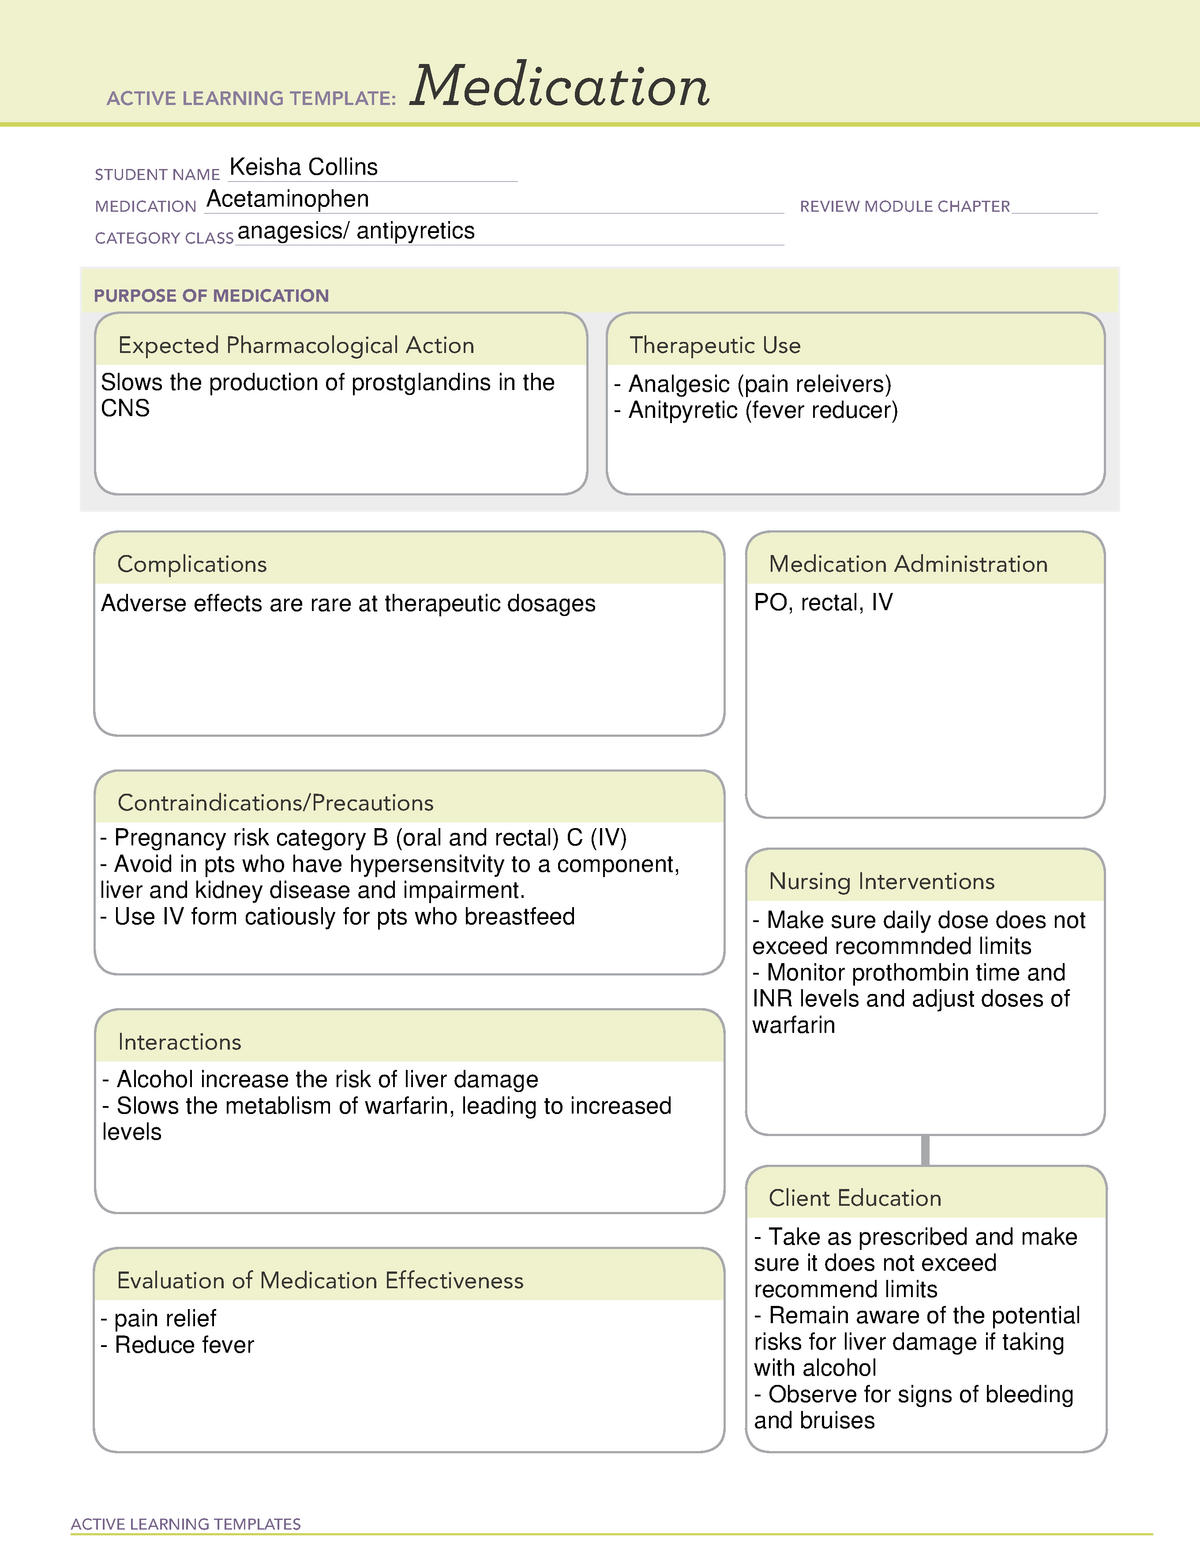 Acetaminophen med template ACTIVE LEARNING TEMPLATES Medication